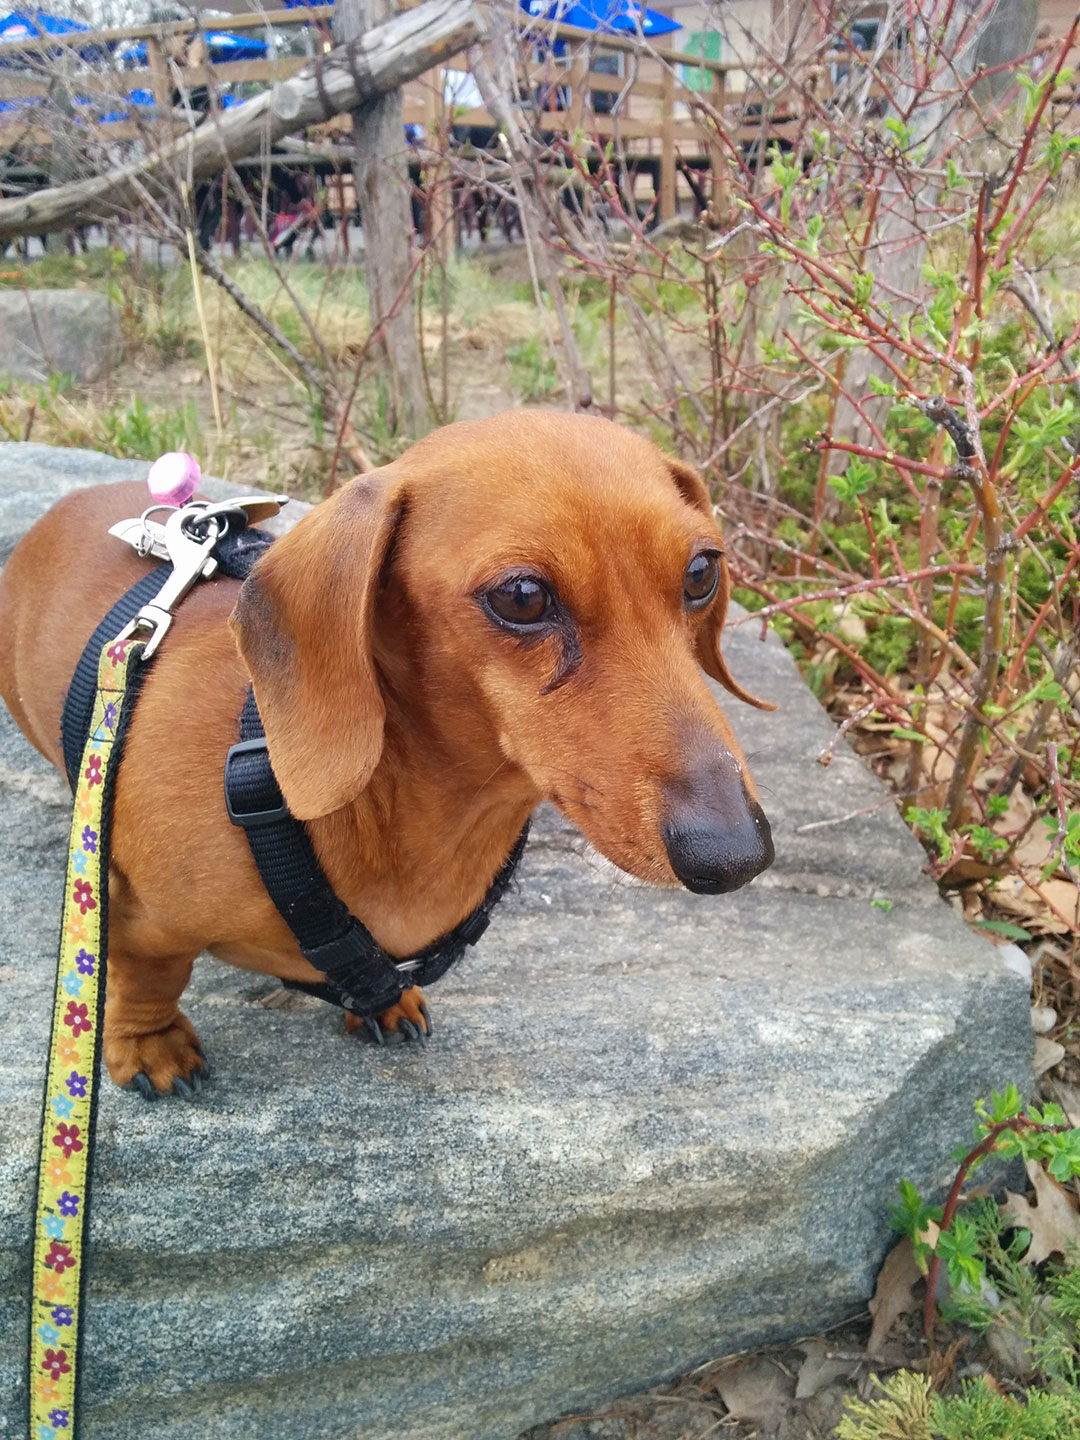 A mini Dachshund in a black harness standing on a rock next to bushes with no leaves